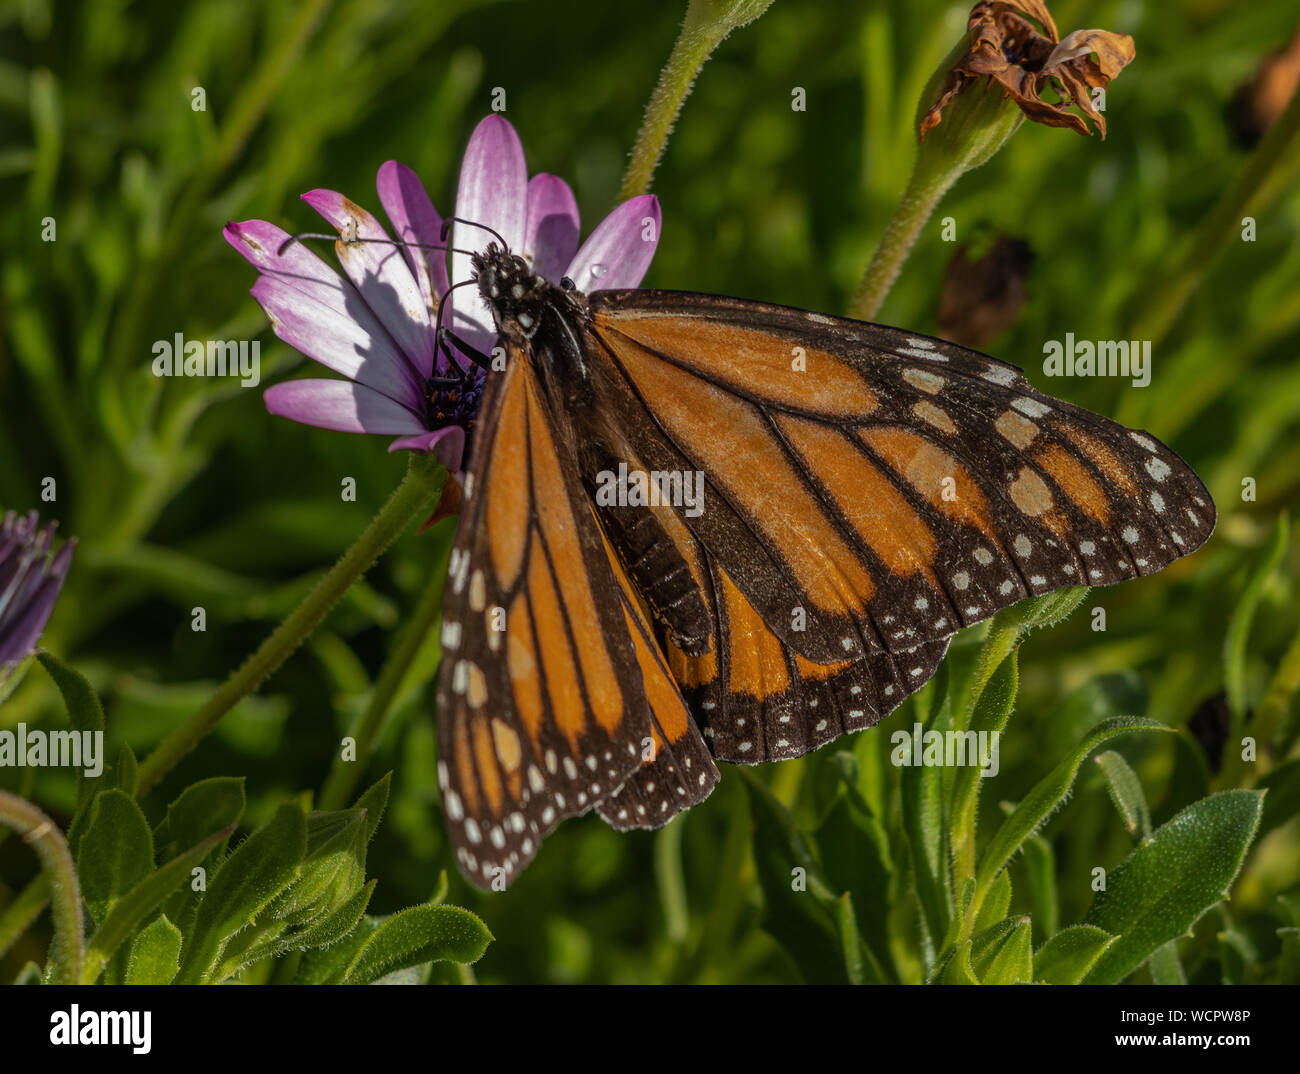 Monarch butterfly on purple and white daisy Stock Photo